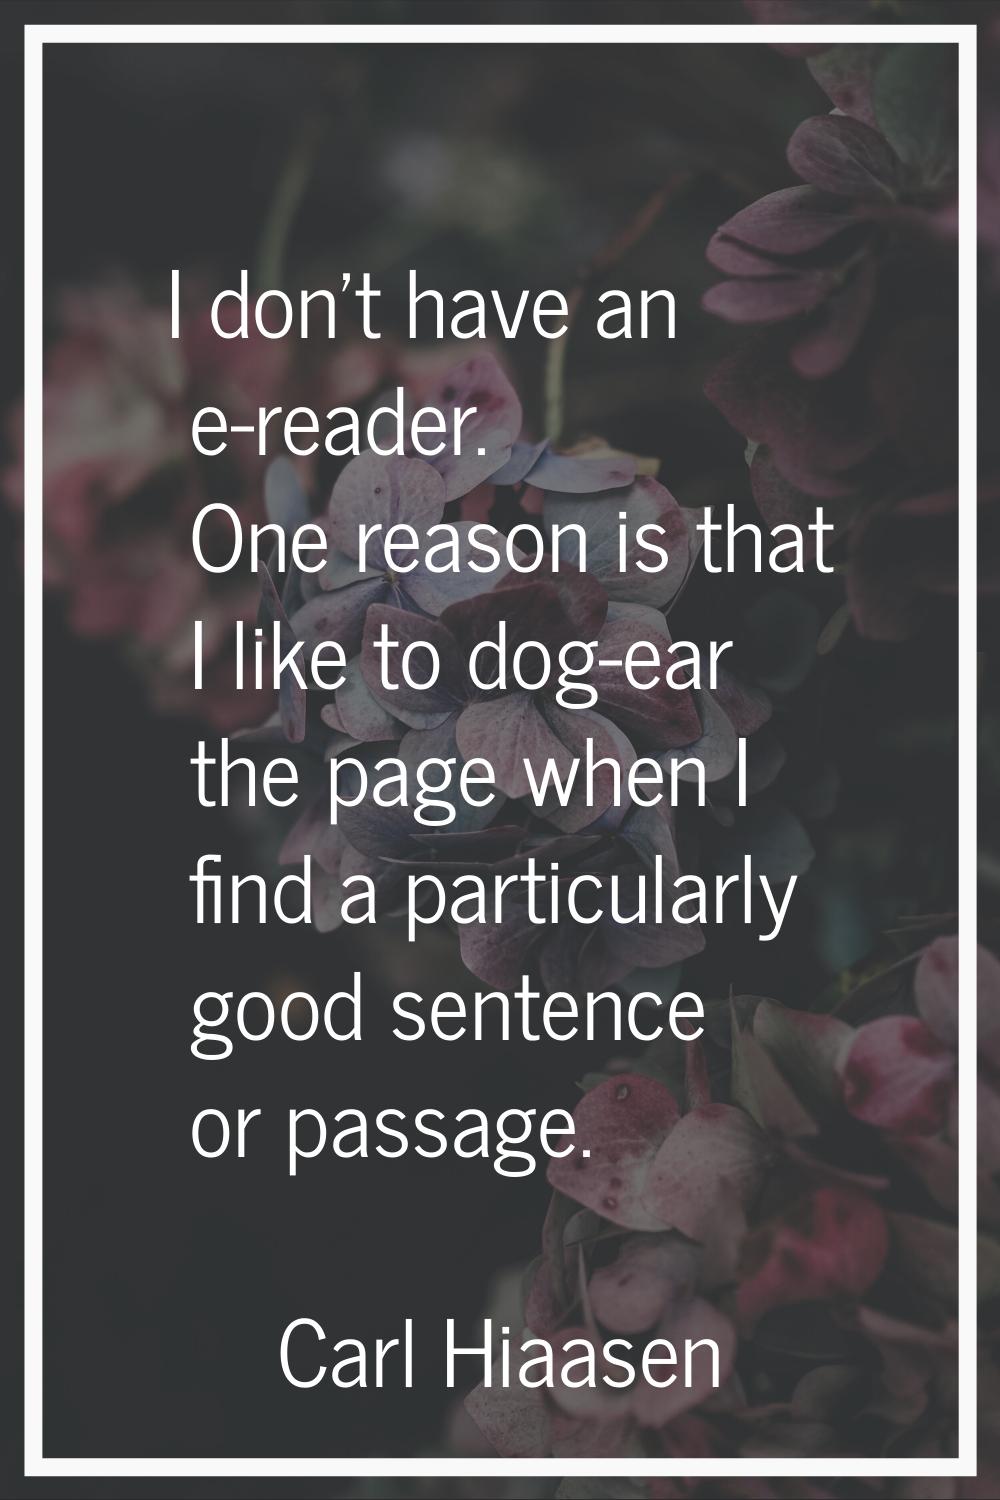 I don't have an e-reader. One reason is that I like to dog-ear the page when I find a particularly 